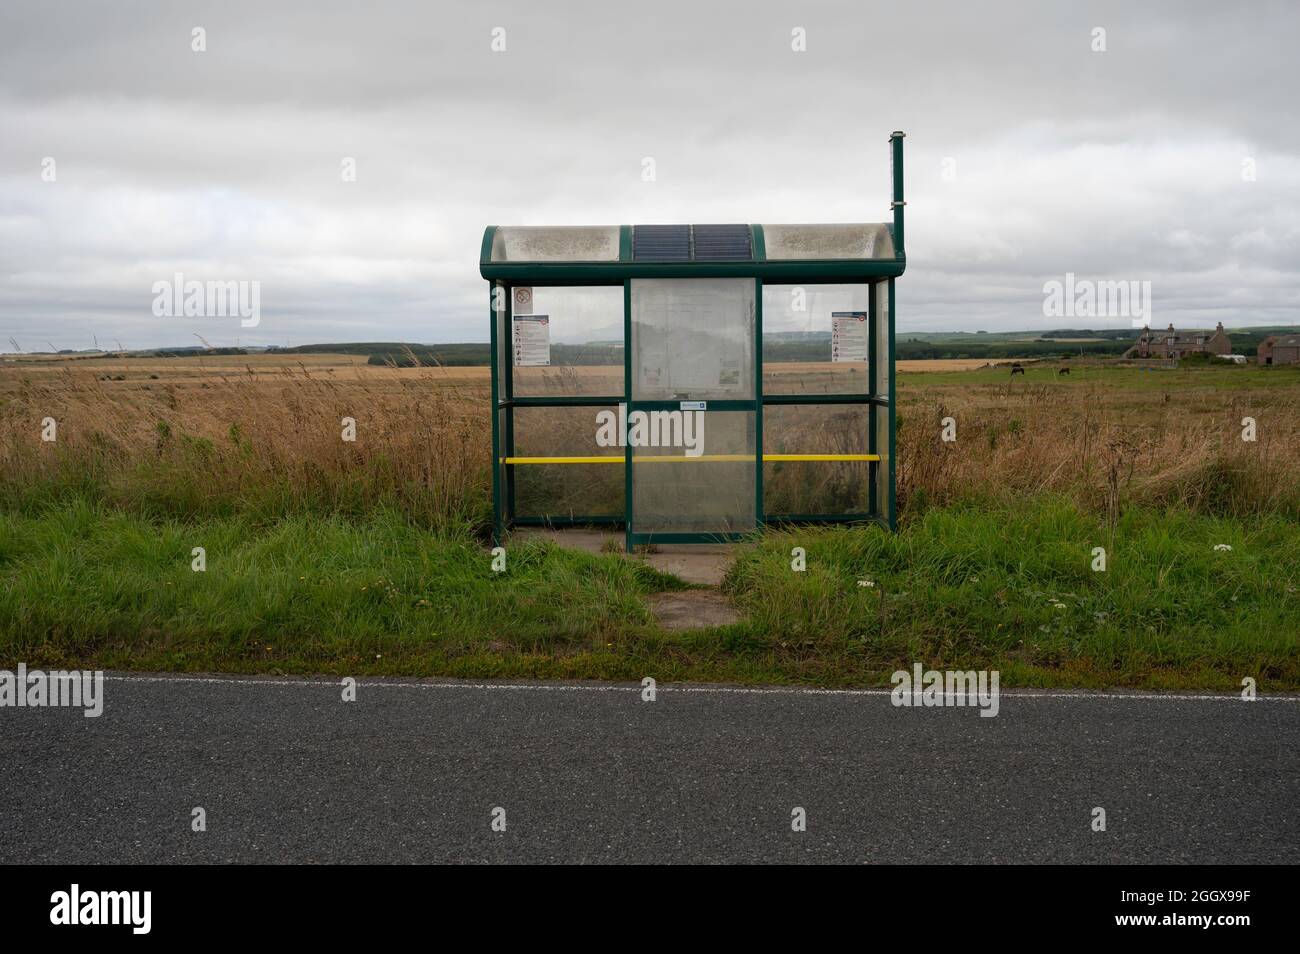 A rural bus stop and shelter with fields and farm in background. Road in foreground. No people. Aberdeenshire, Scotland. Stock Photo